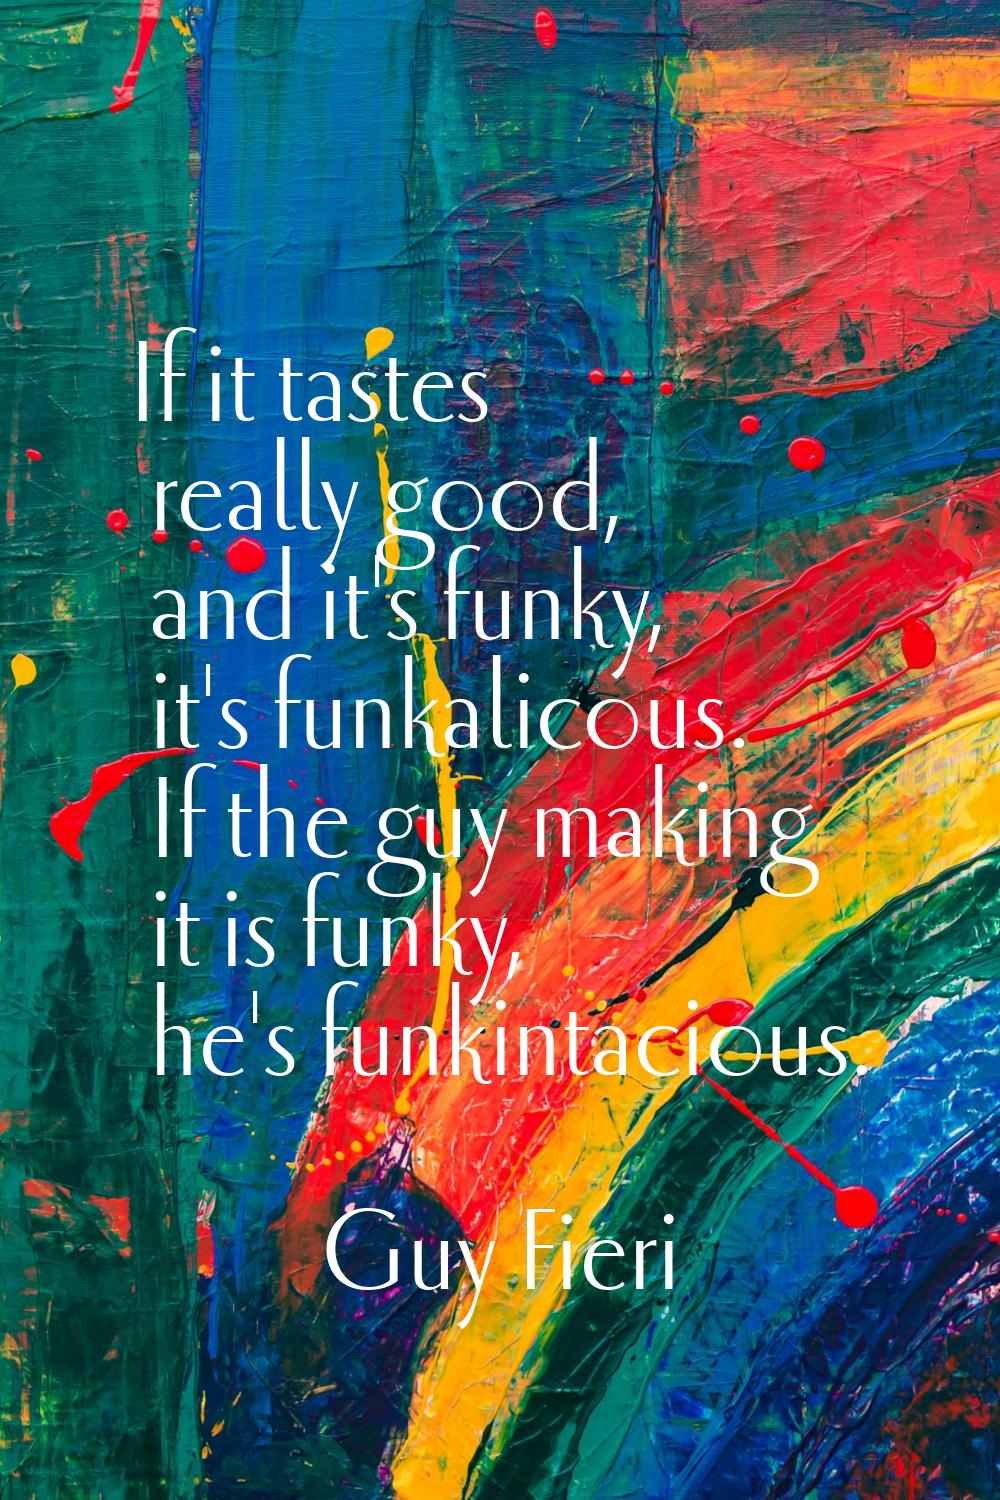 If it tastes really good, and it's funky, it's funkalicous. If the guy making it is funky, he's fun